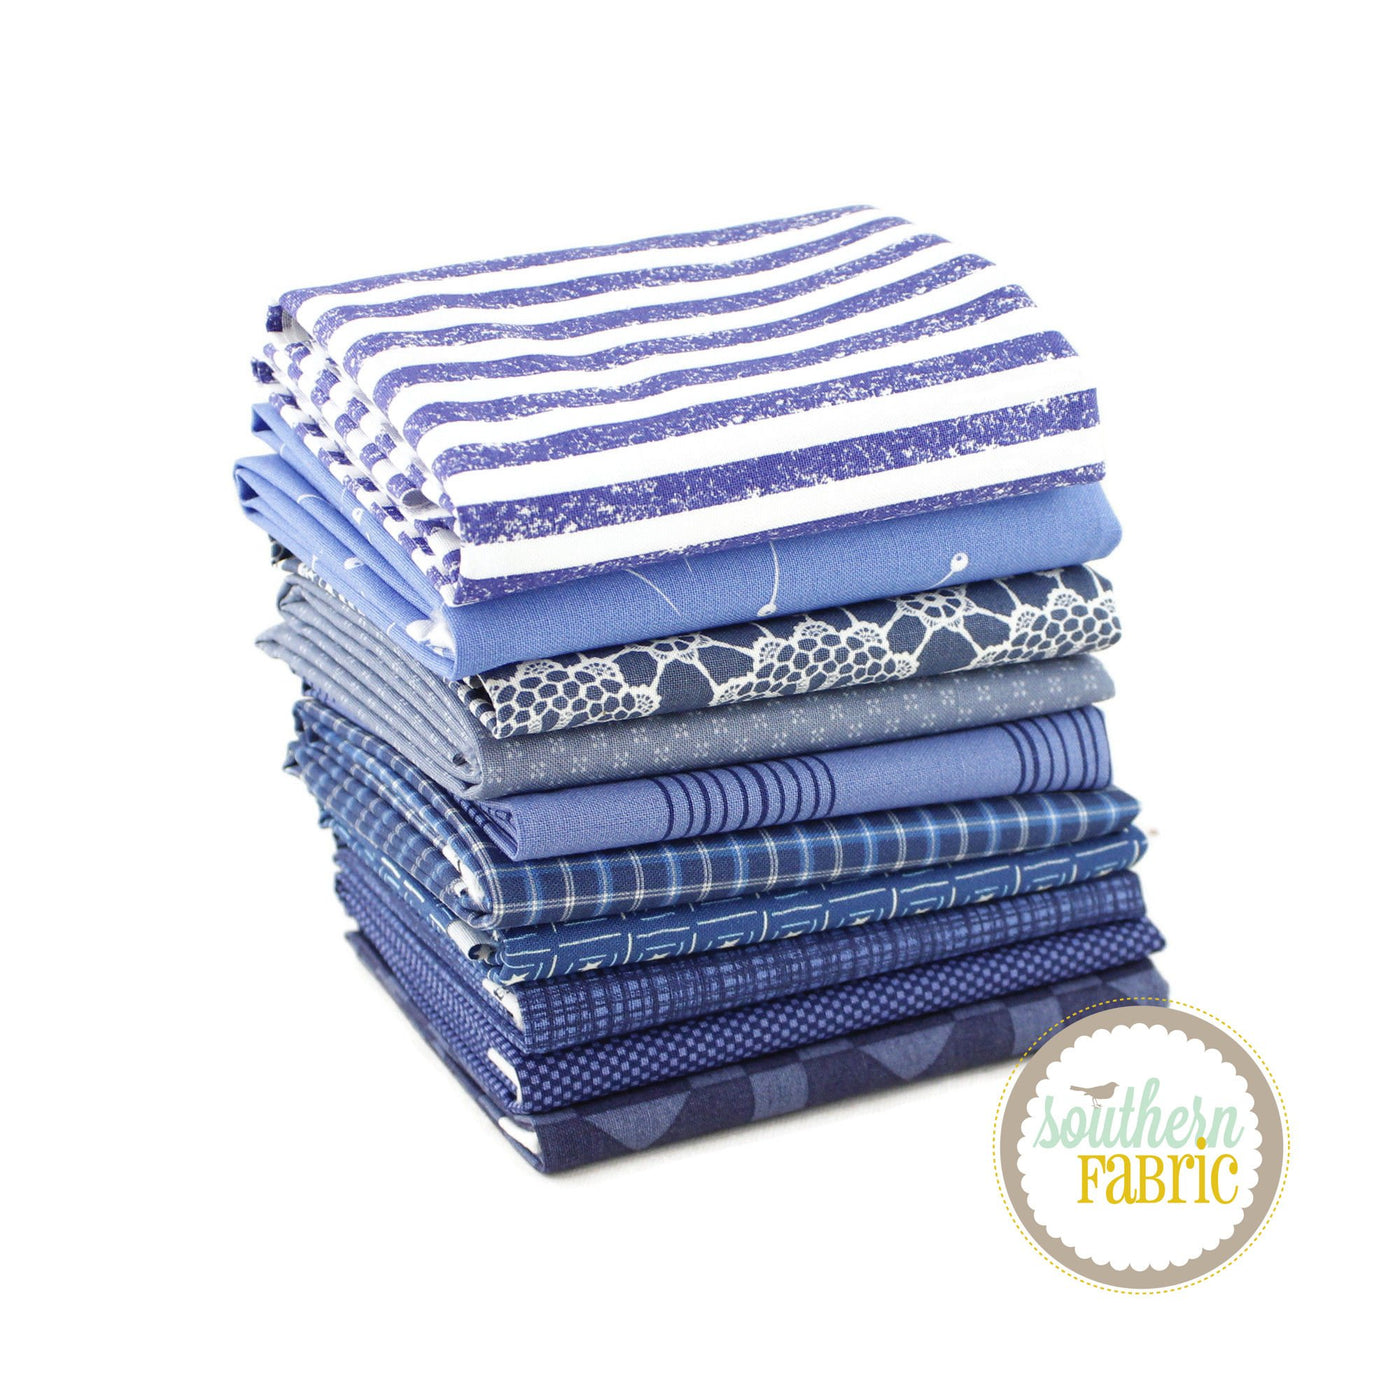 Dark Blue Fat Quarter Bundle (10 pcs) by Mixed Designers for Southern Fabric